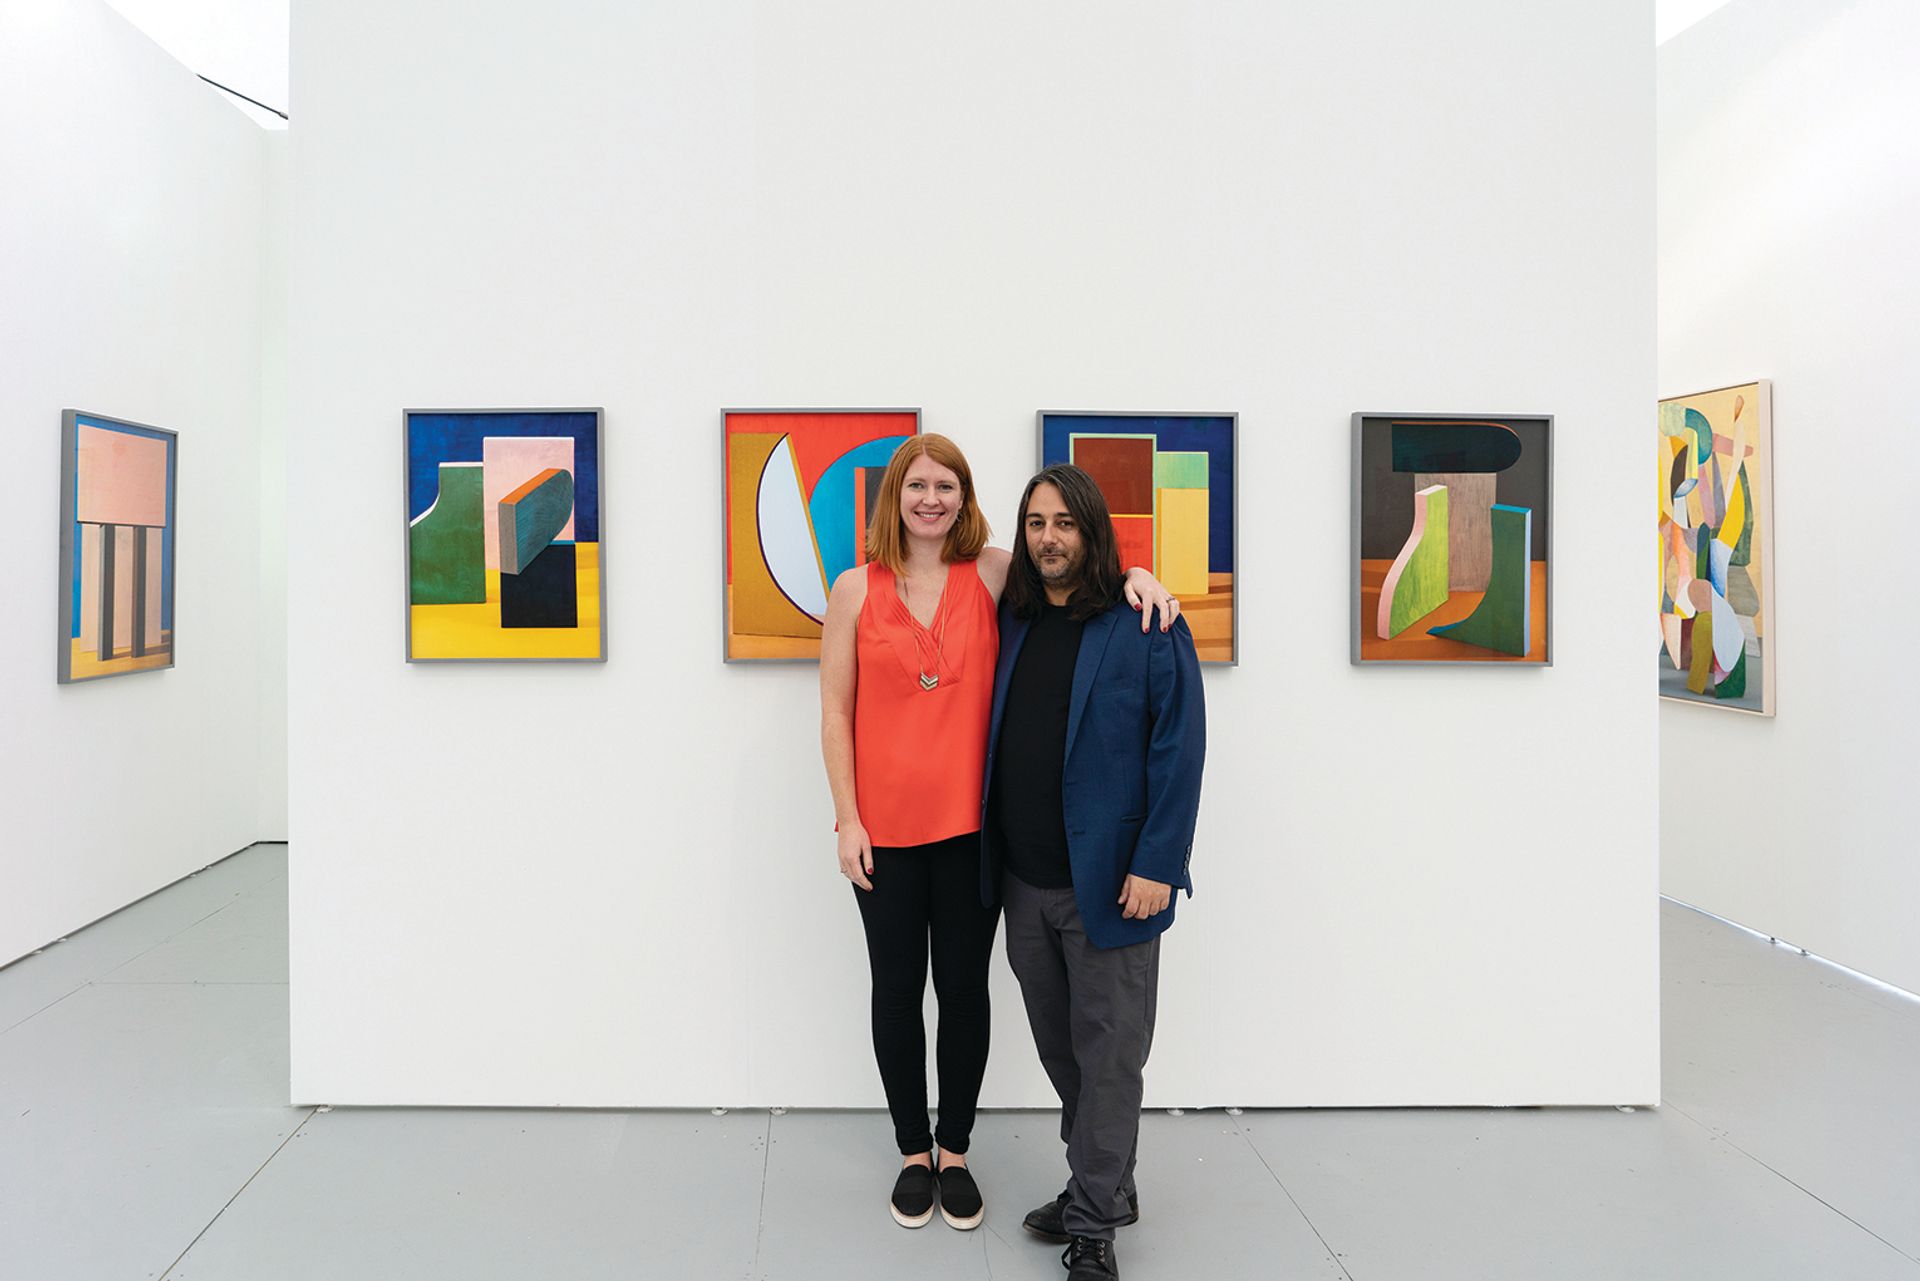 Newcomers on the rise: Elizabeth Denny and Robert Dimin Sean Fader and courtesy Denny Dimin Gallery